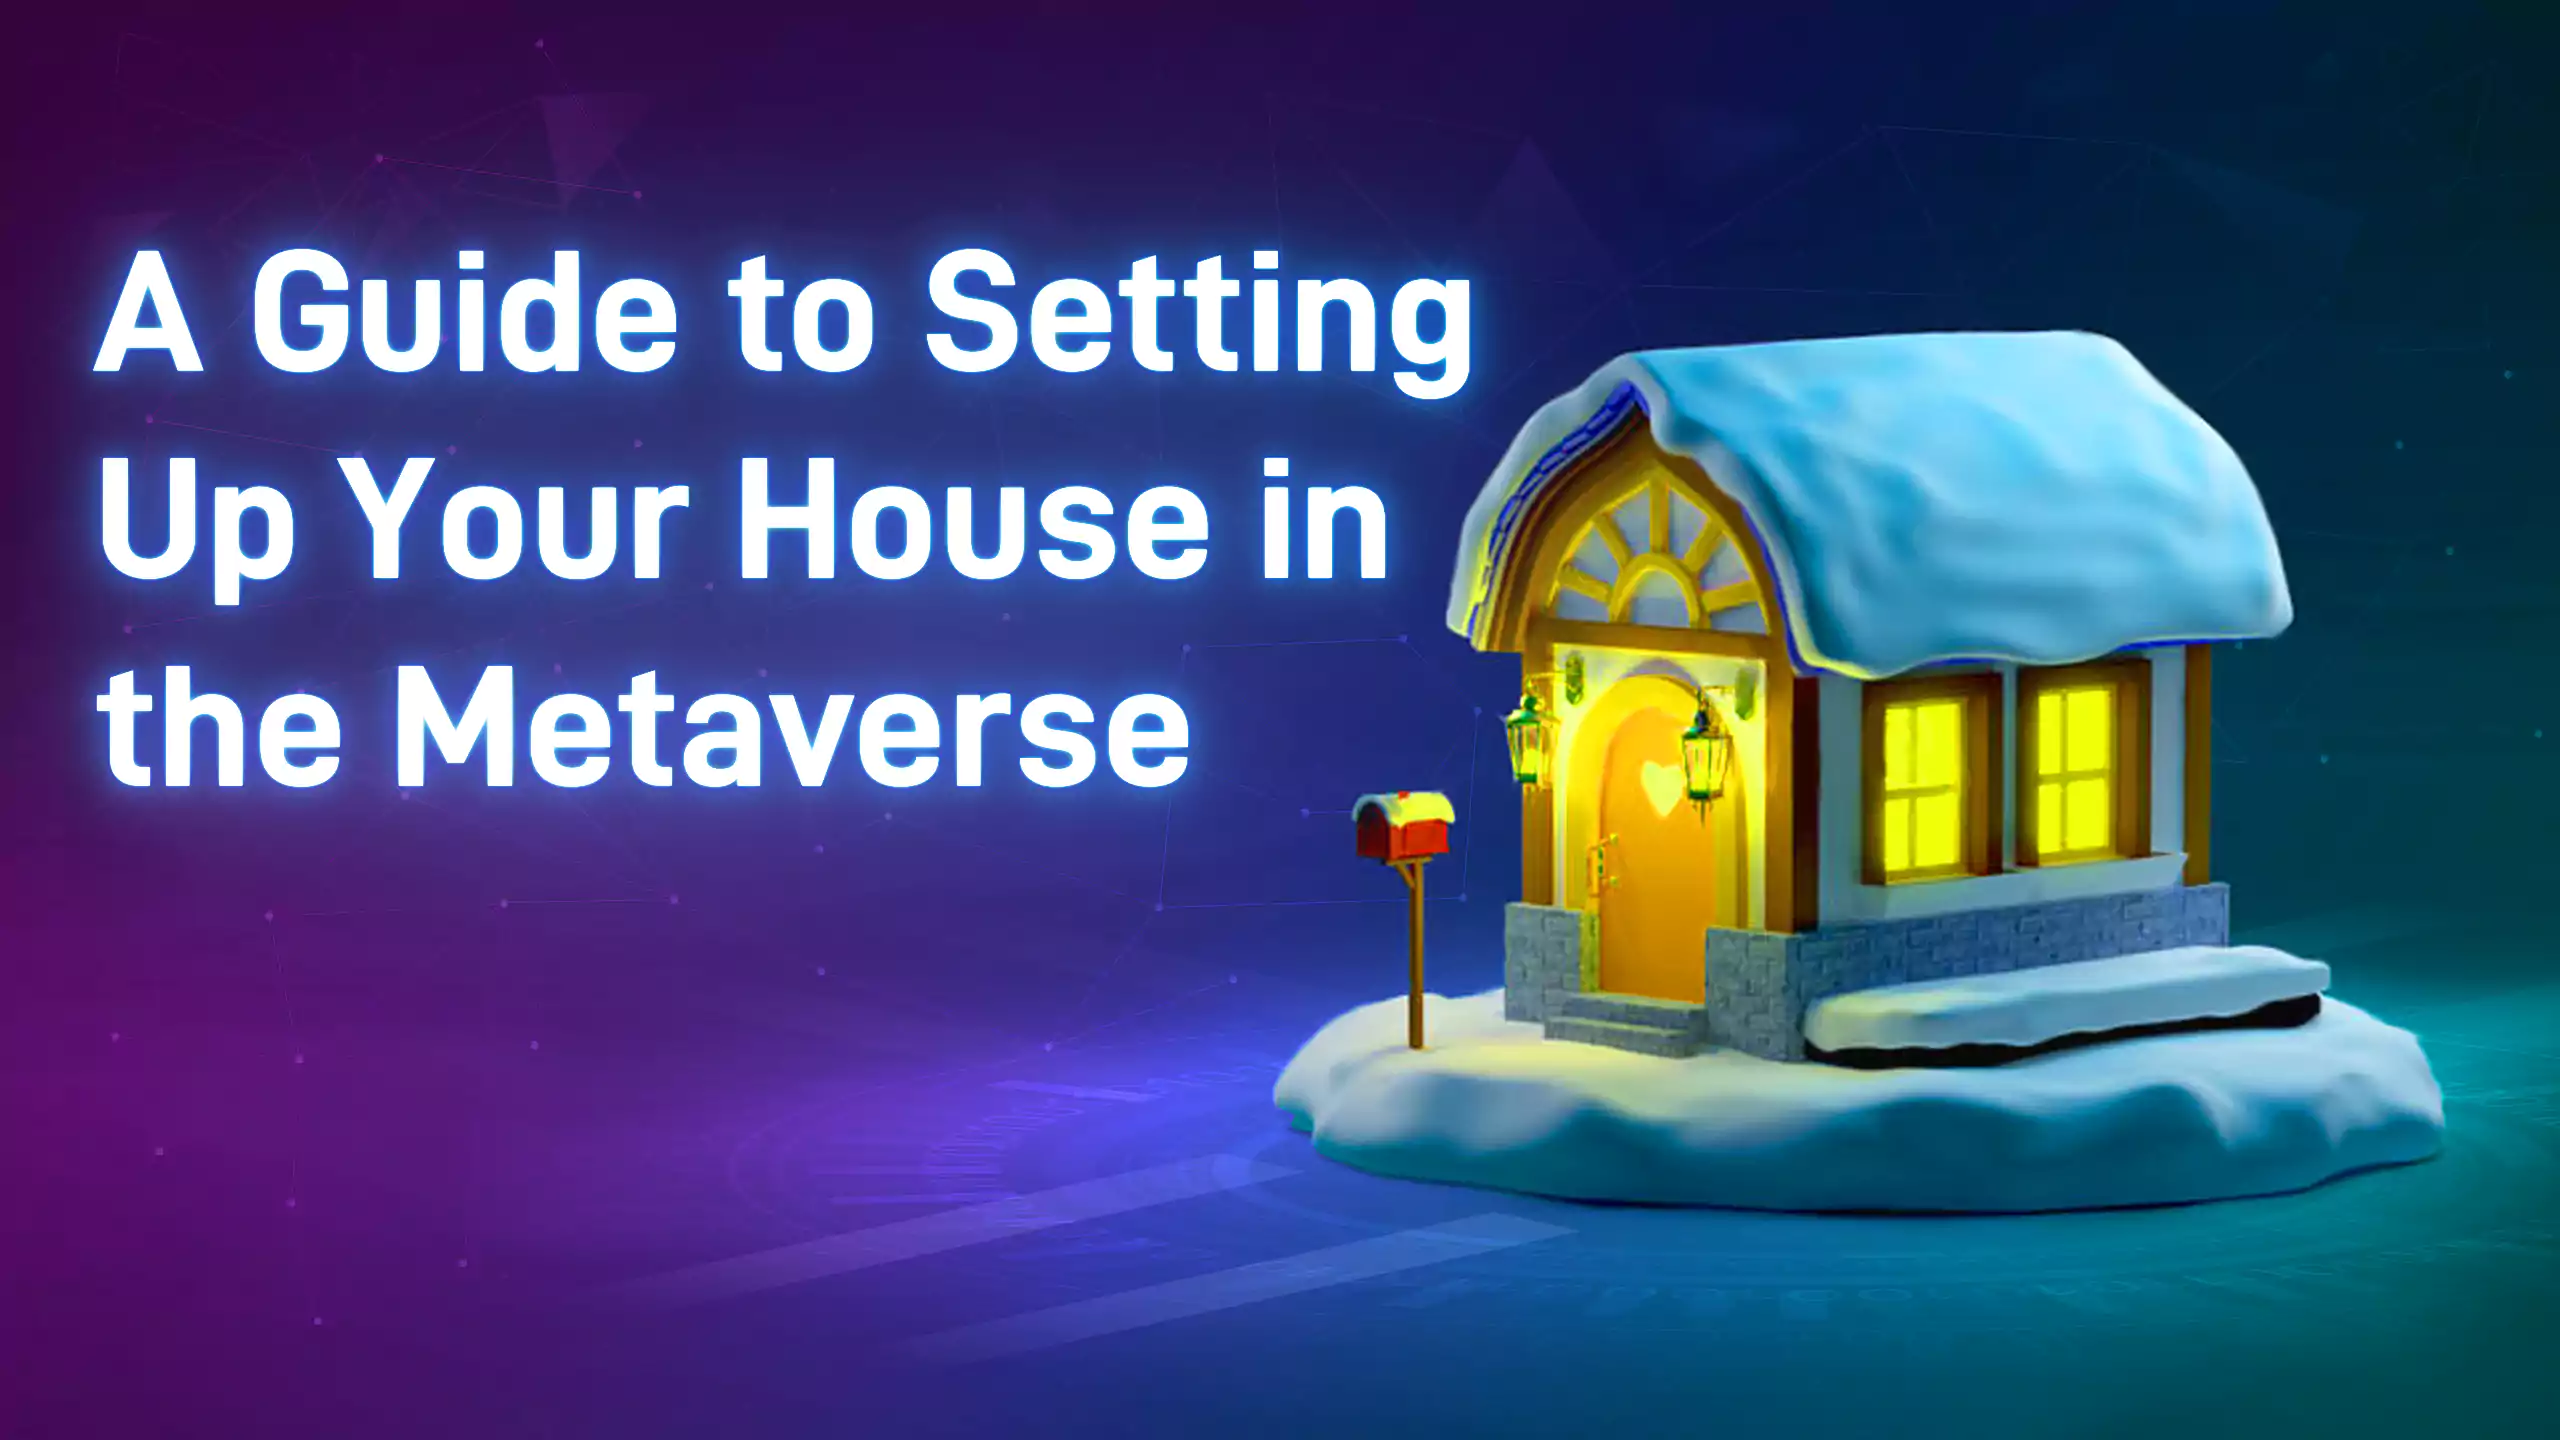 A Guide to Setting Up Your House in the Metaverse